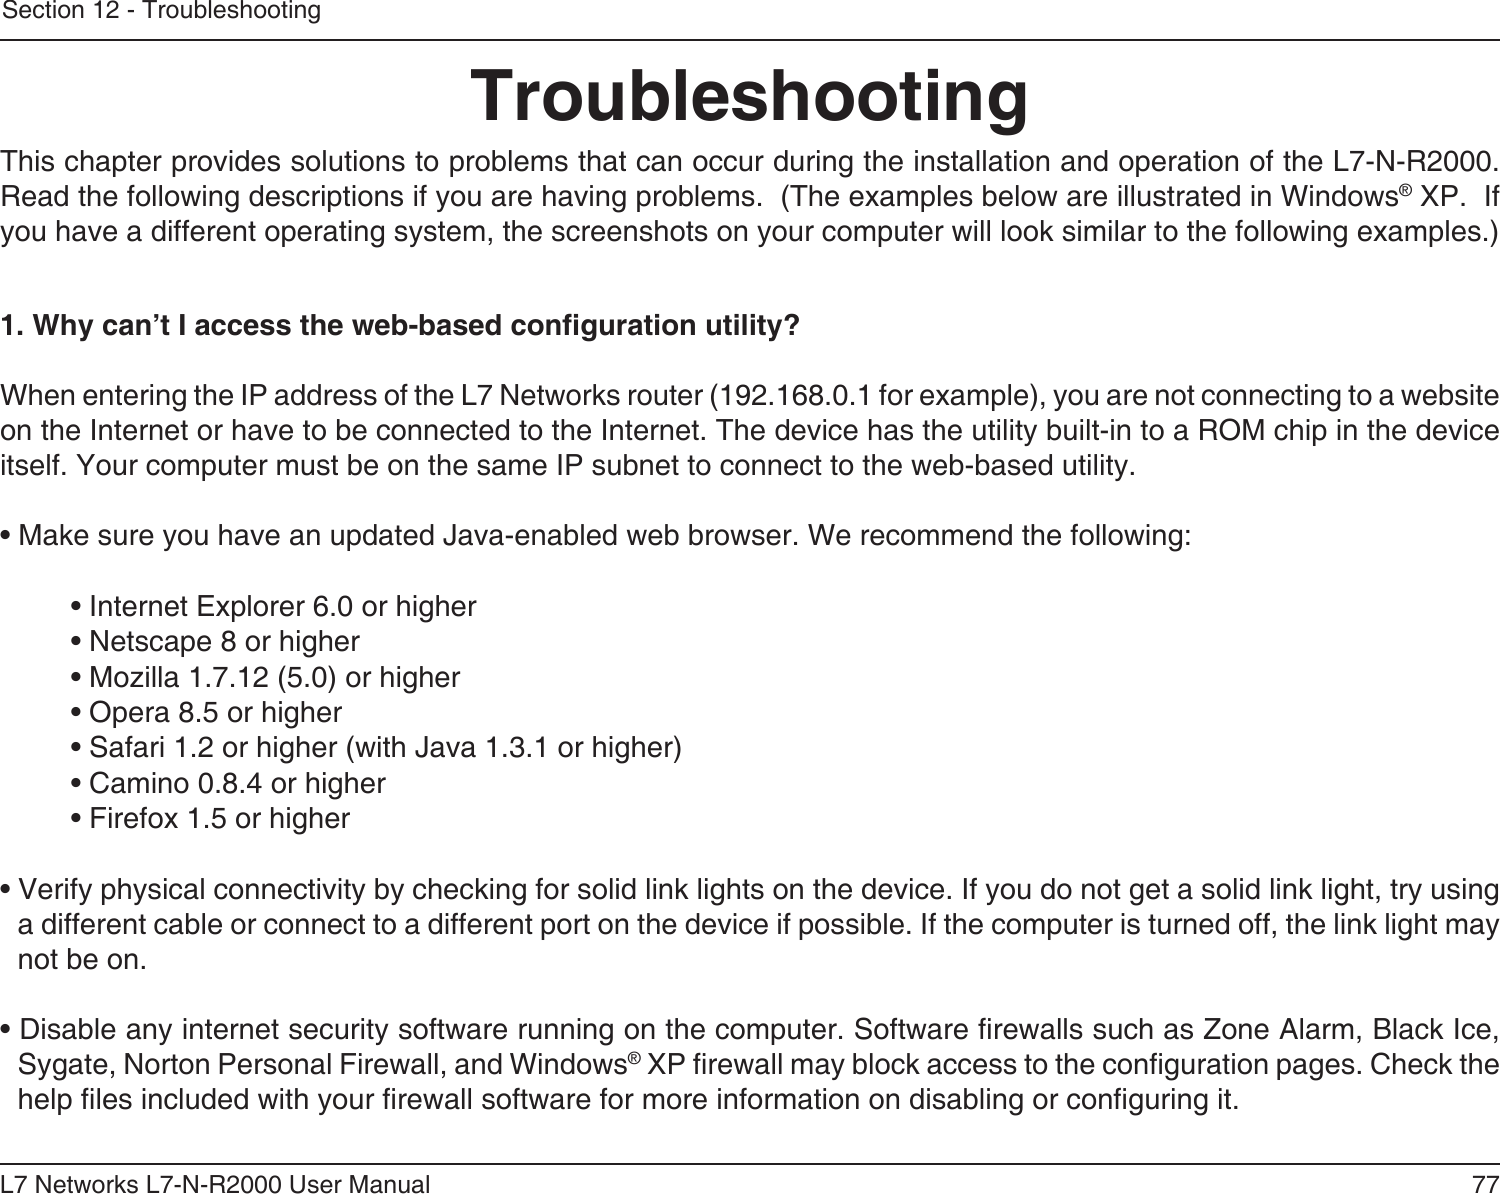 77L7 Networks L7-N-R2000 User ManualSection 12 - TroubleshootingTroubleshootingThis chapter provides solutions to problems that can occur during the installation and operation of the L7-N-R2000.  Read the following descriptions if you are having problems.  (The examples below are illustrated in Windows® XP.  If you have a different operating system, the screenshots on your computer will look similar to the following examples.)1. Why can’t I access the web-based conguration utility?When entering the IP address of the L7 Networks router (192.168.0.1 for example), you are not connecting to a website on the Internet or have to be connected to the Internet. The device has the utility built-in to a ROM chip in the device itself. Your computer must be on the same IP subnet to connect to the web-based utility. • Make sure you have an updated Java-enabled web browser. We recommend the following: • Internet Explorer 6.0 or higher • Netscape 8 or higher • Mozilla 1.7.12 (5.0) or higher • Opera 8.5 or higher • Safari 1.2 or higher (with Java 1.3.1 or higher) • Camino 0.8.4 or higher • Firefox 1.5 or higher • Verify physical connectivity by checking for solid link lights on the device. If you do not get a solid link light, try using a different cable or connect to a different port on the device if possible. If the computer is turned off, the link light may not be on.• Disable any internet security software running on the computer. Software rewalls such as Zone Alarm, Black Ice, Sygate, Norton Personal Firewall, and Windows® XP rewall may block access to the conguration pages. Check the help les included with your rewall software for more information on disabling or conguring it.